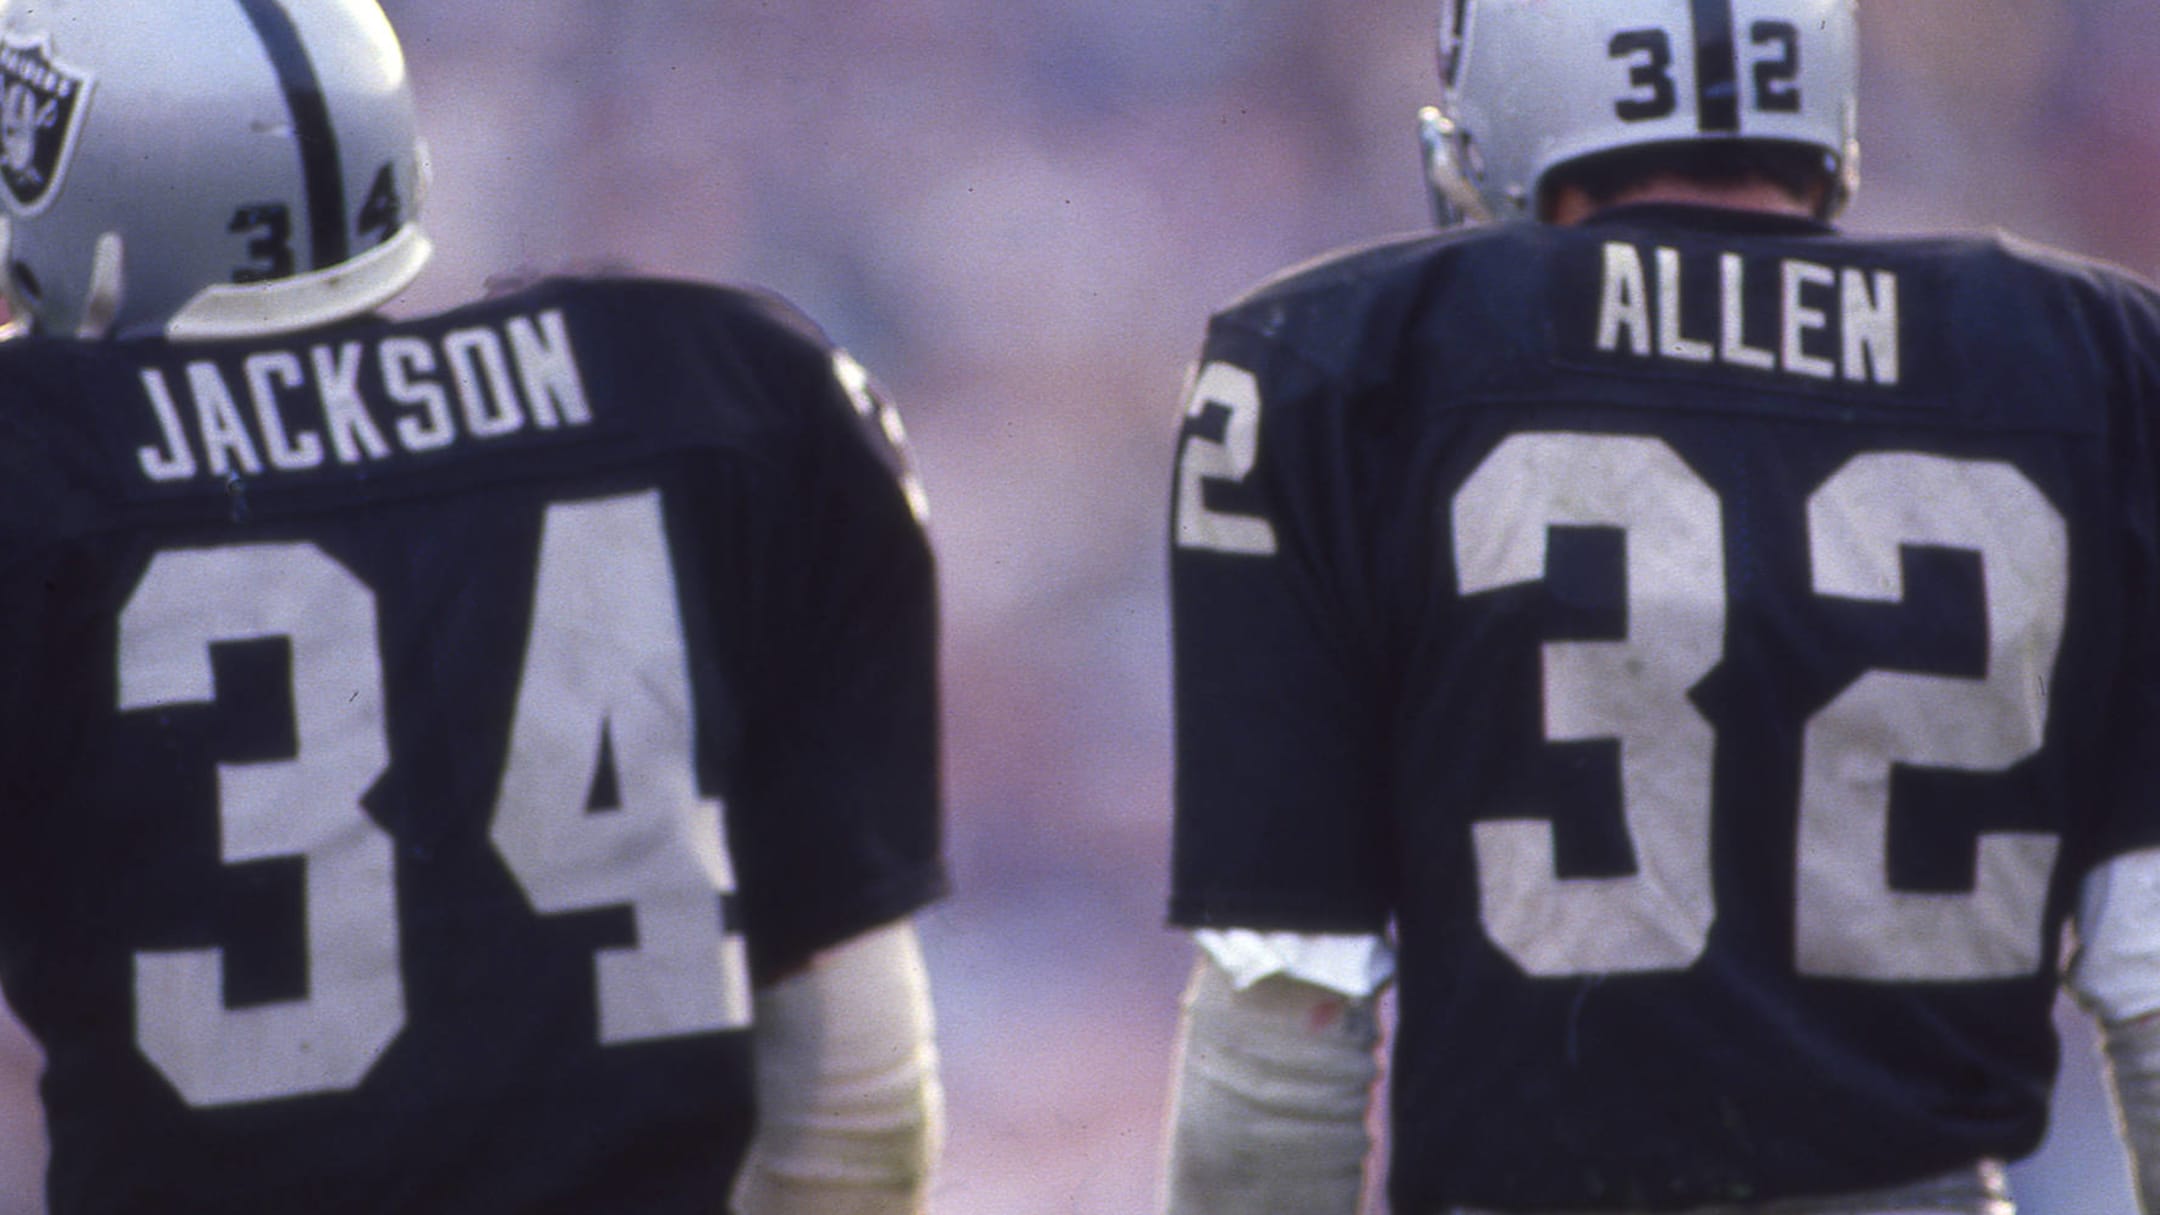 Bo Jackson-Charles Barkley duo tops list of best combined college